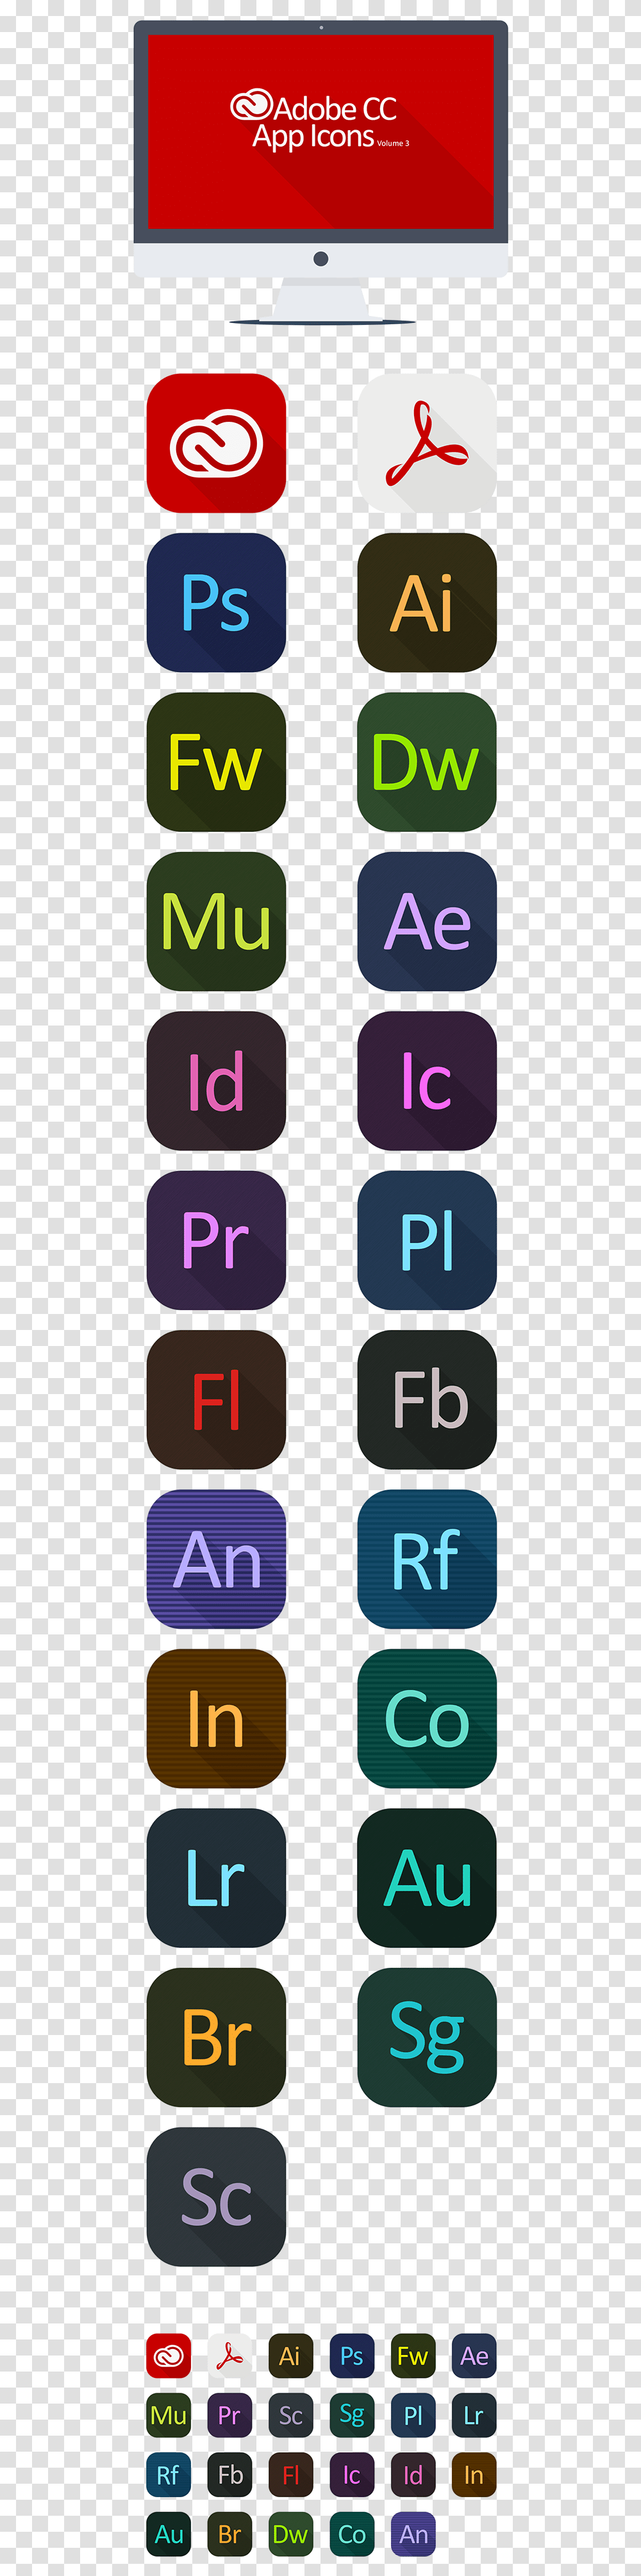 Adobe Cc Icons Behance, Number, Computer Keyboard Transparent Png